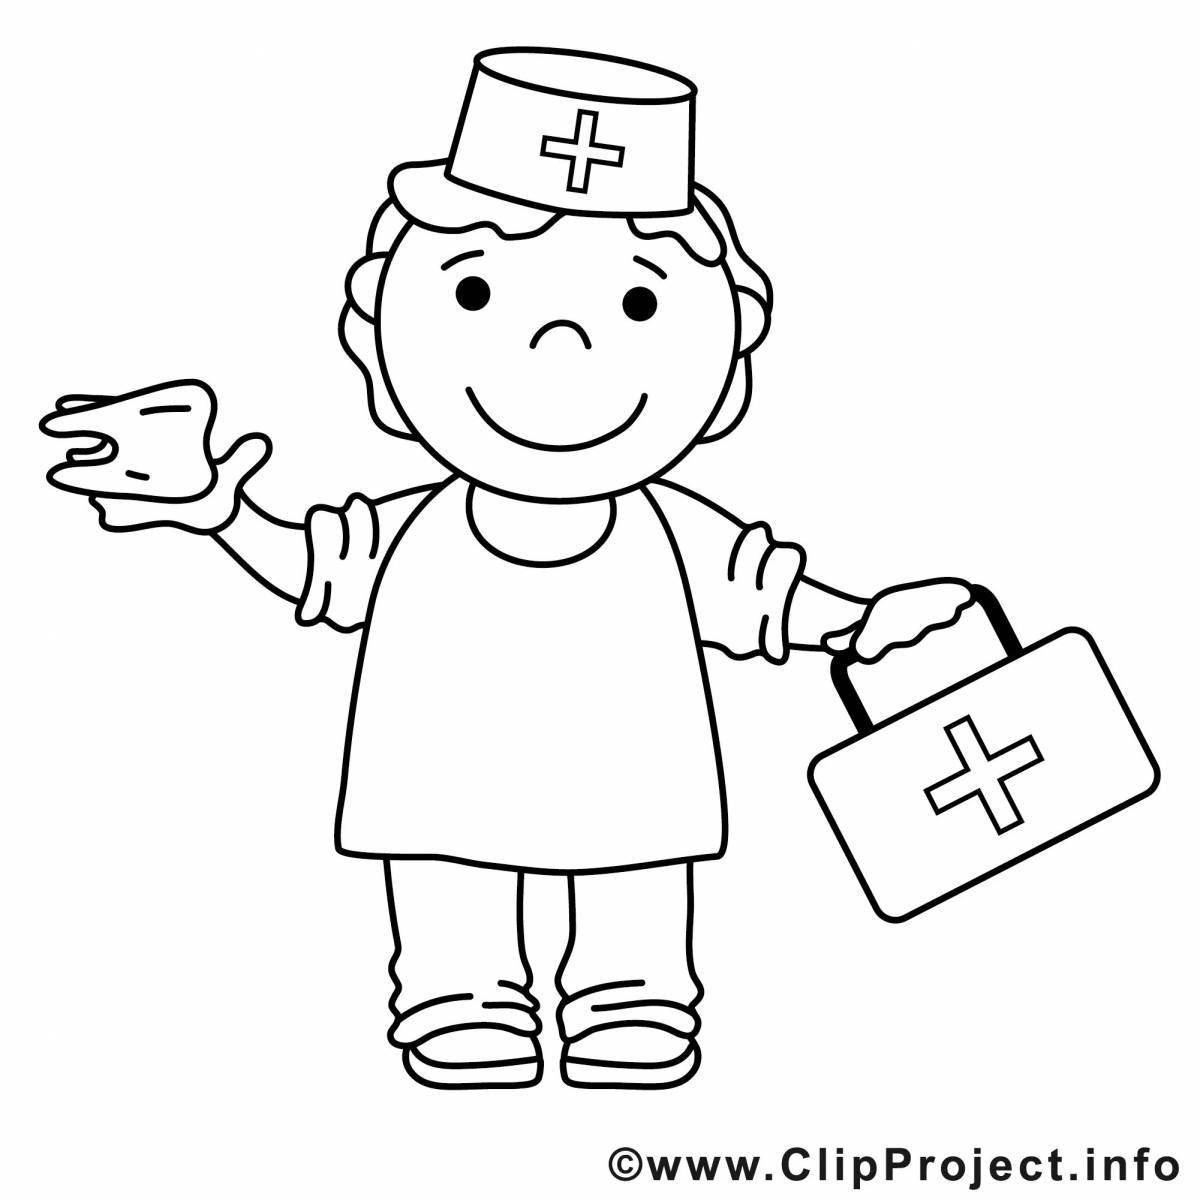 Adorable military nurse coloring page for kids